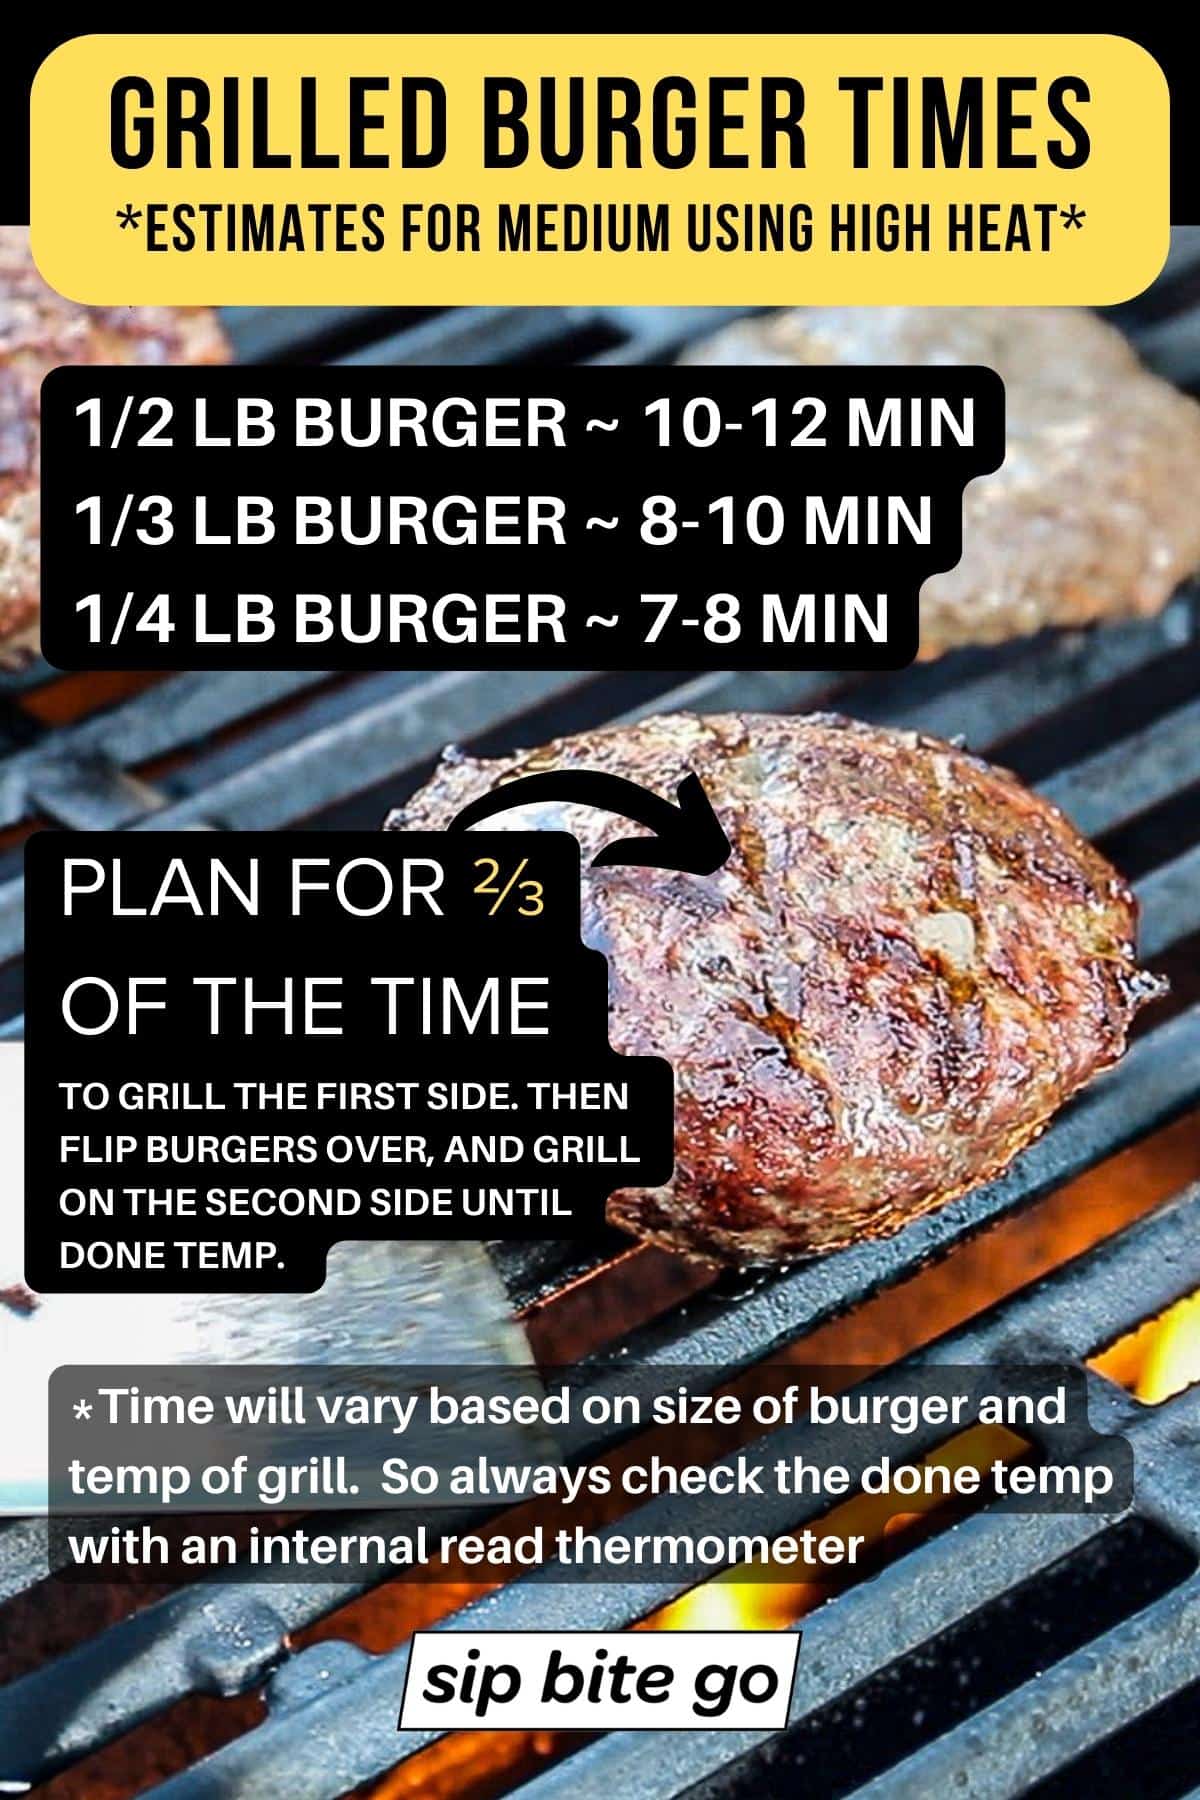 Infographic chart with captions describing how long to grill burgers medium done temp for ½ LB ¼ LB and ⅓ LB beef patties